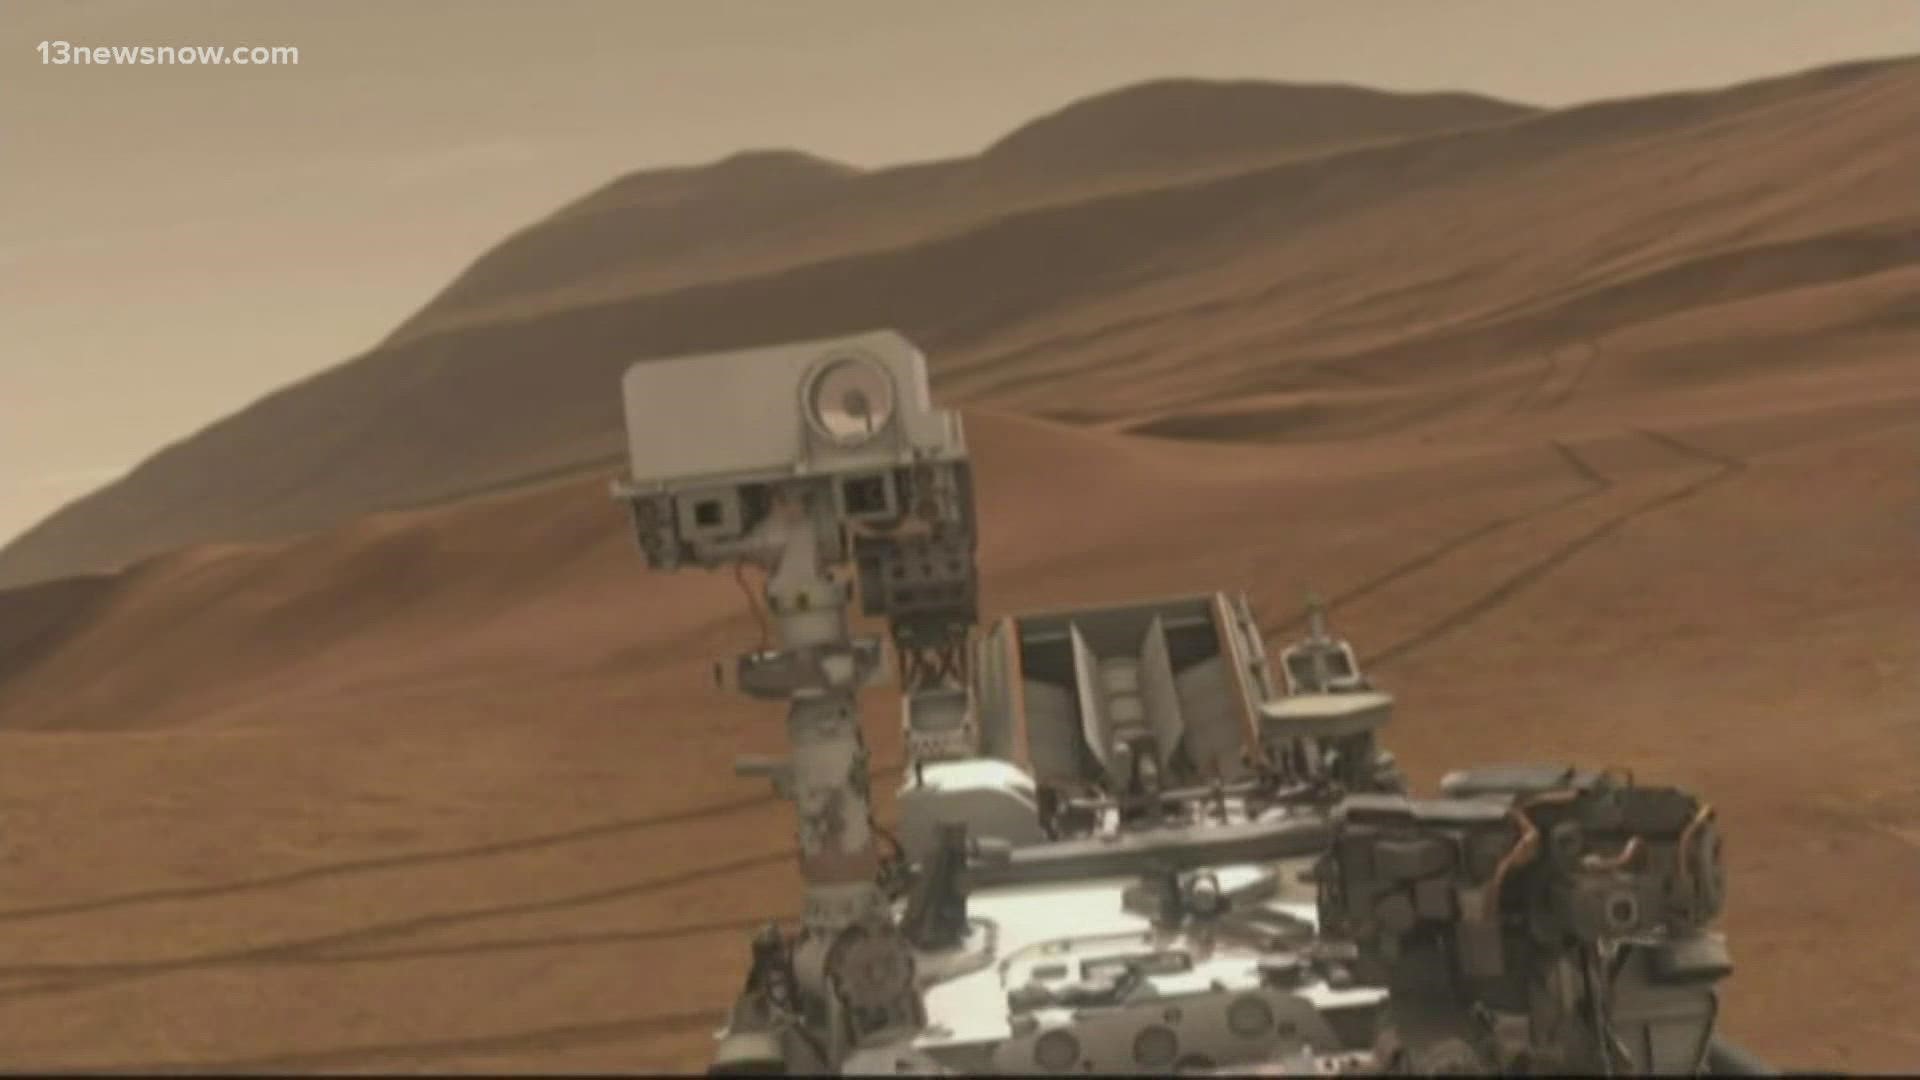 August marks 10 Earth years on the Red Planet for the NASA mobile chemistry lab.